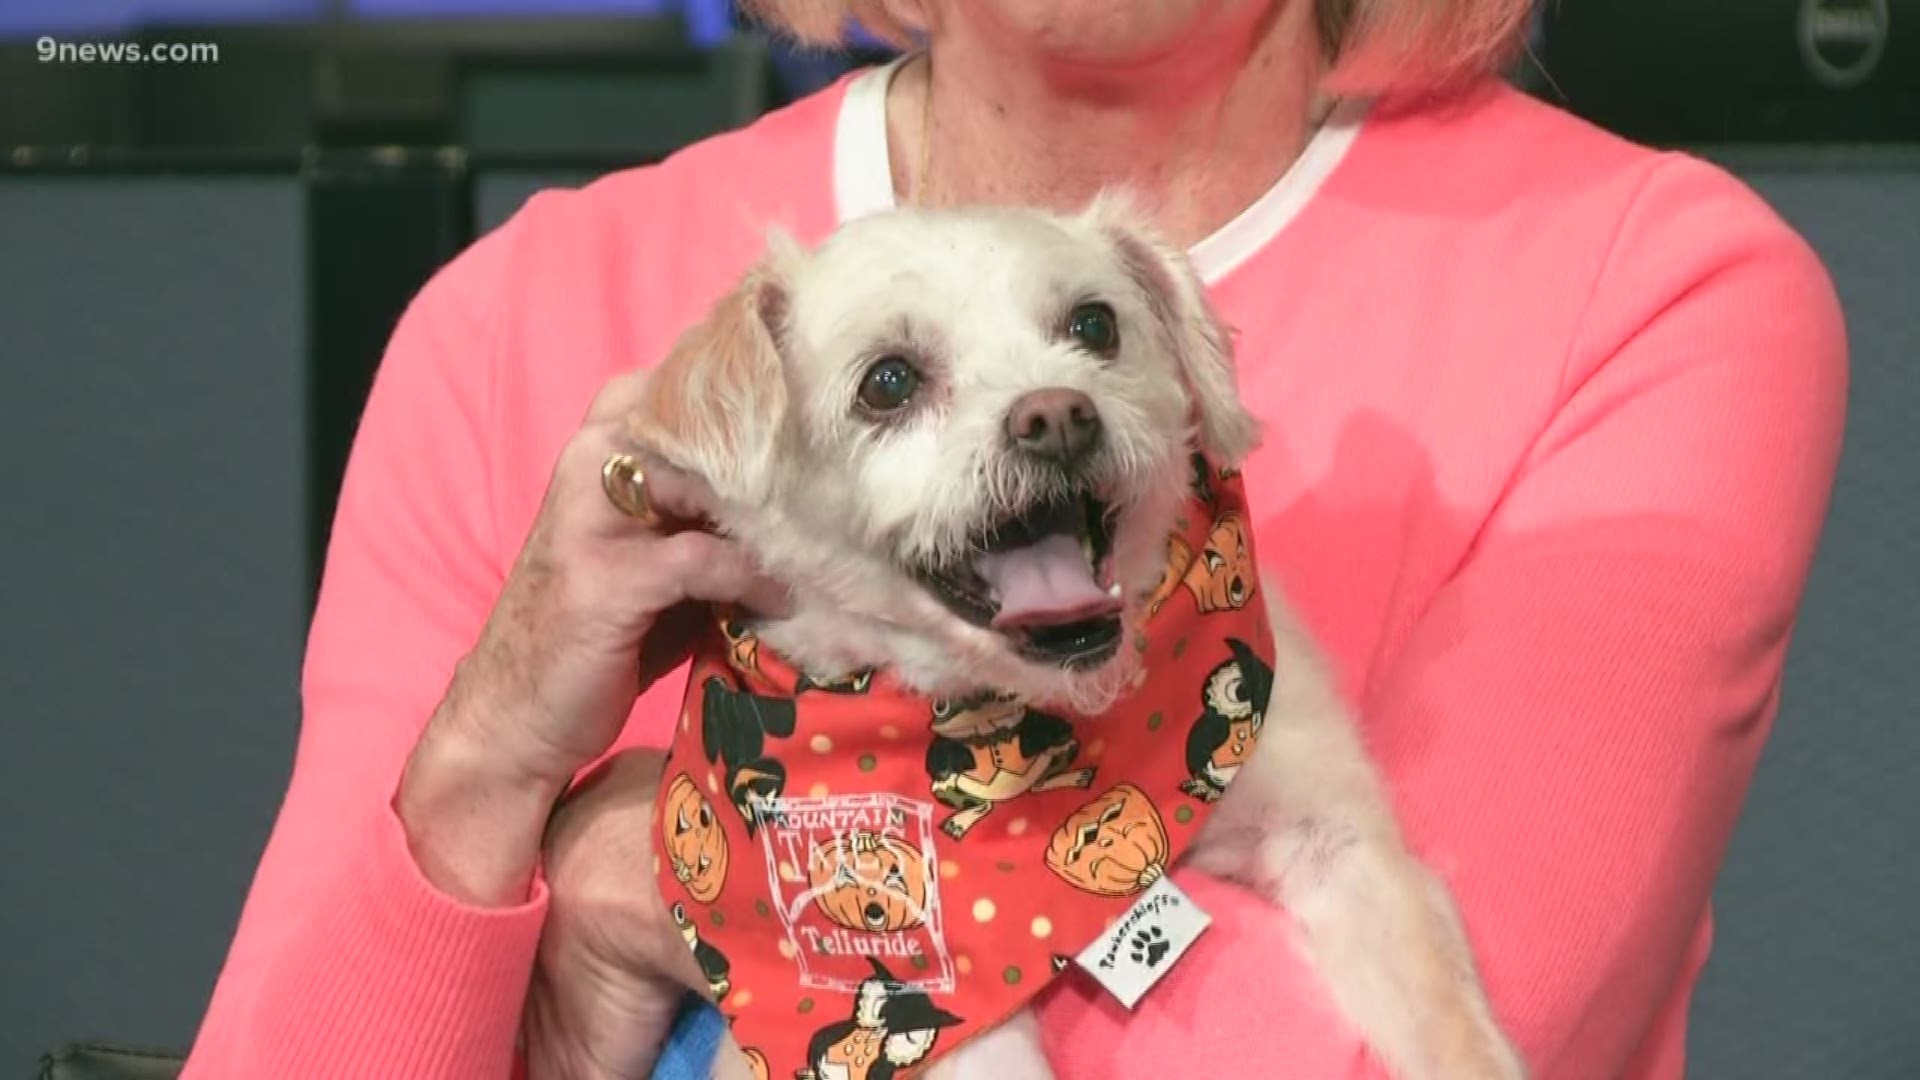 The 12-year-old pooch is spunky, sweet and loves long walks.